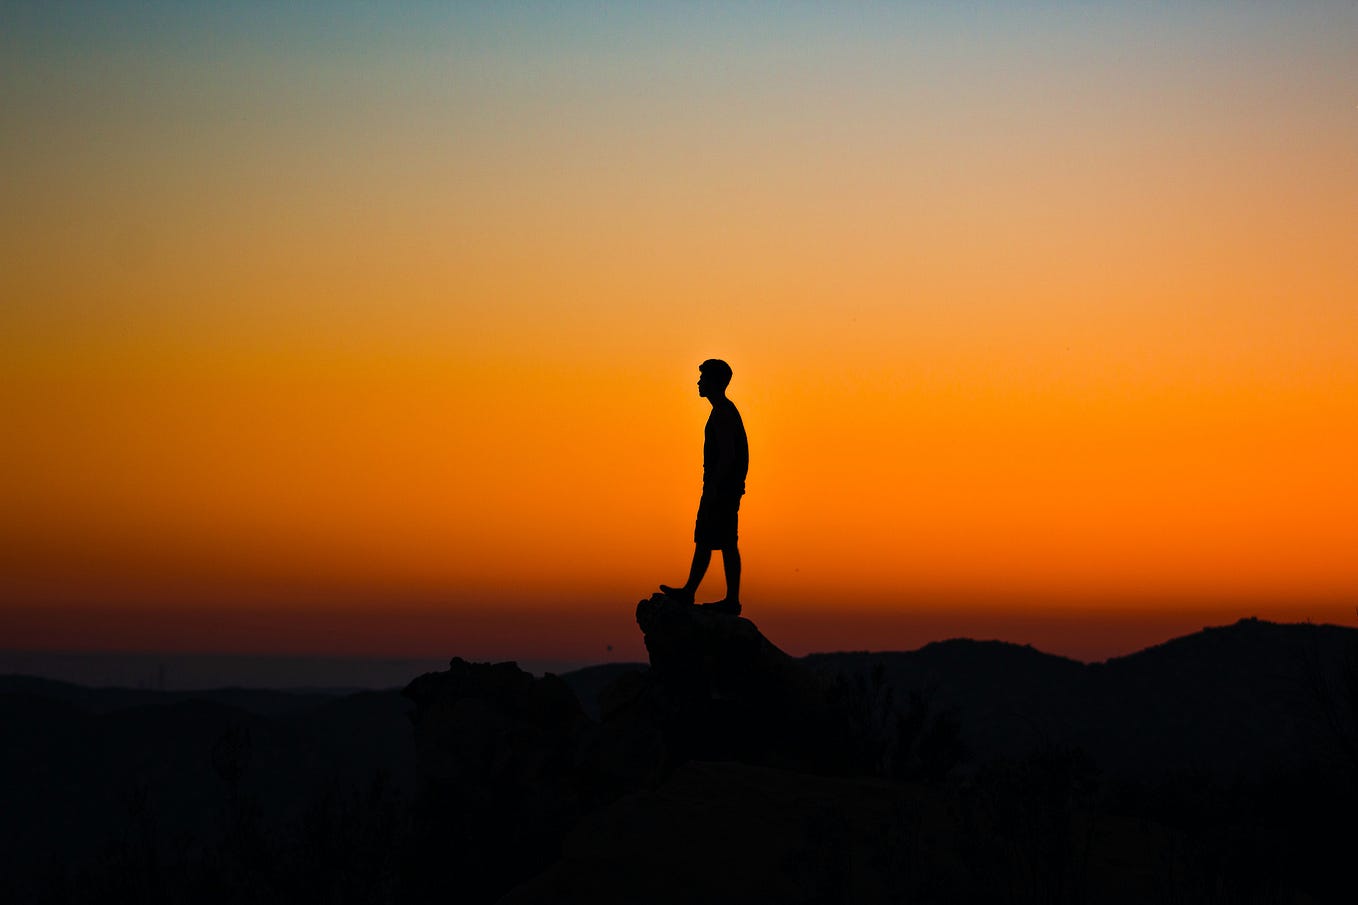 How To Build the Confidence To Stand Alone and Feel Content